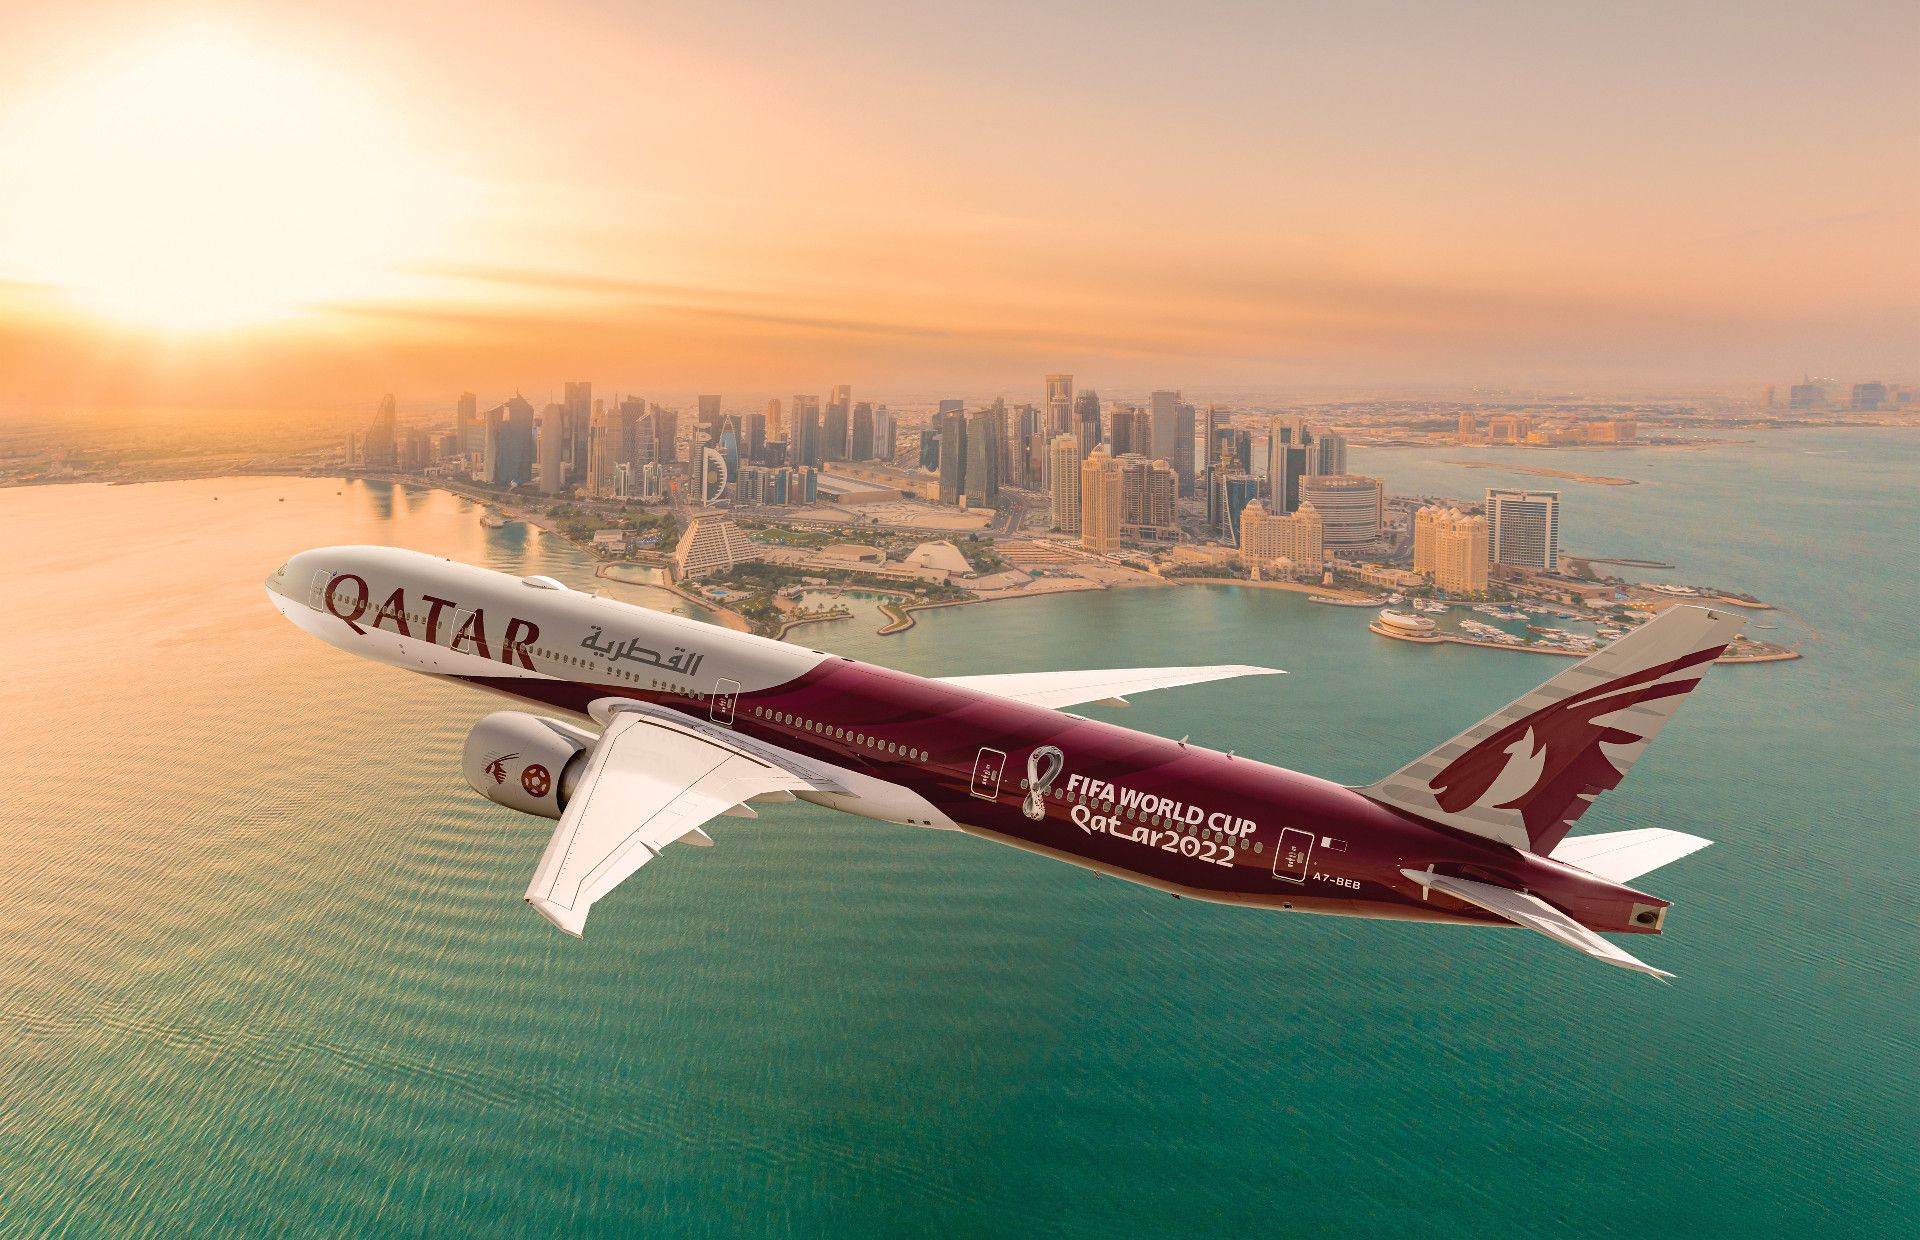 Qatar Airways boeing 777 flying over the city